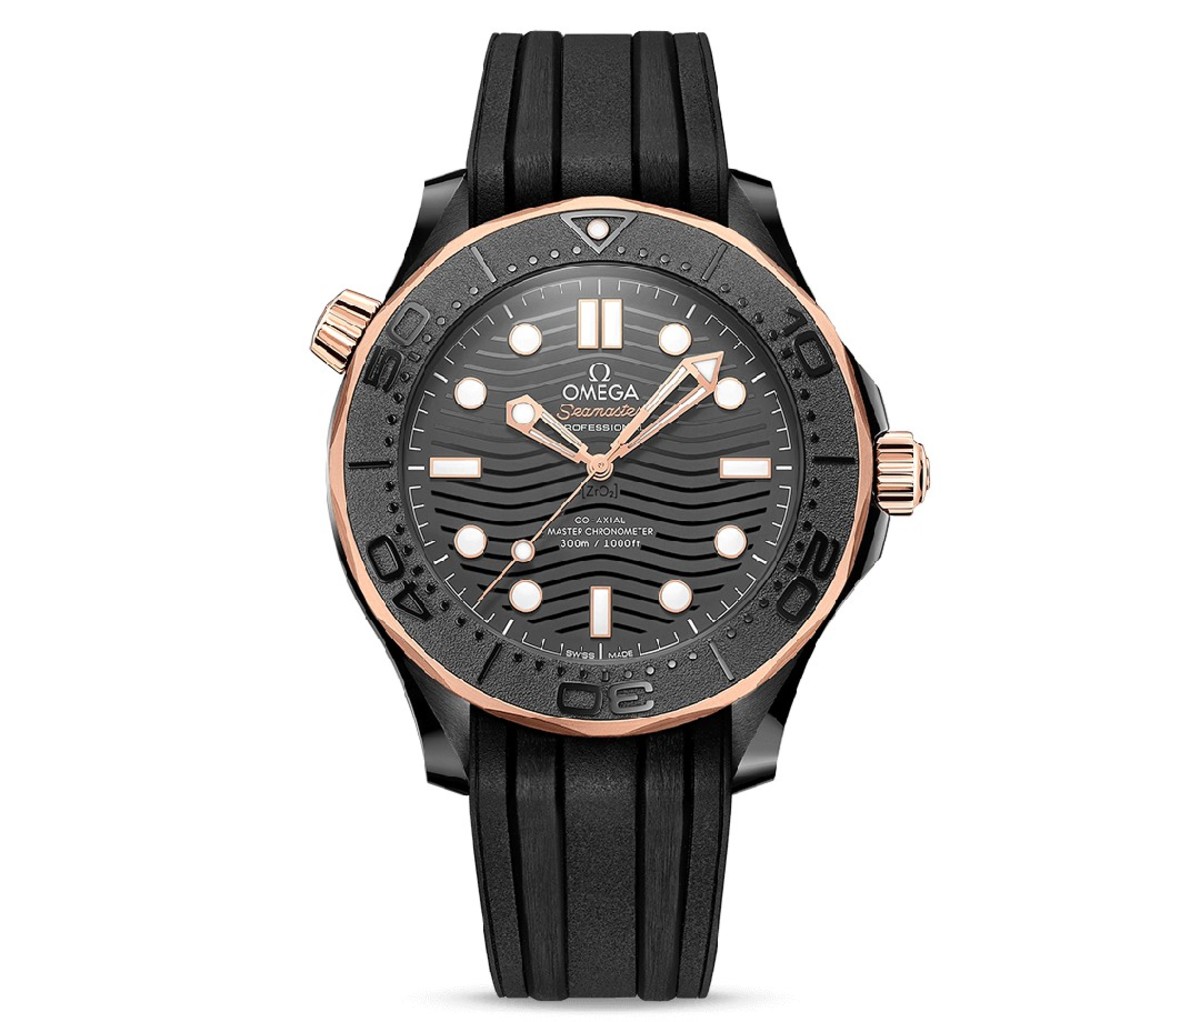 An Omega Seamaster Diver 300 Co-Axial 43.5mm watch.